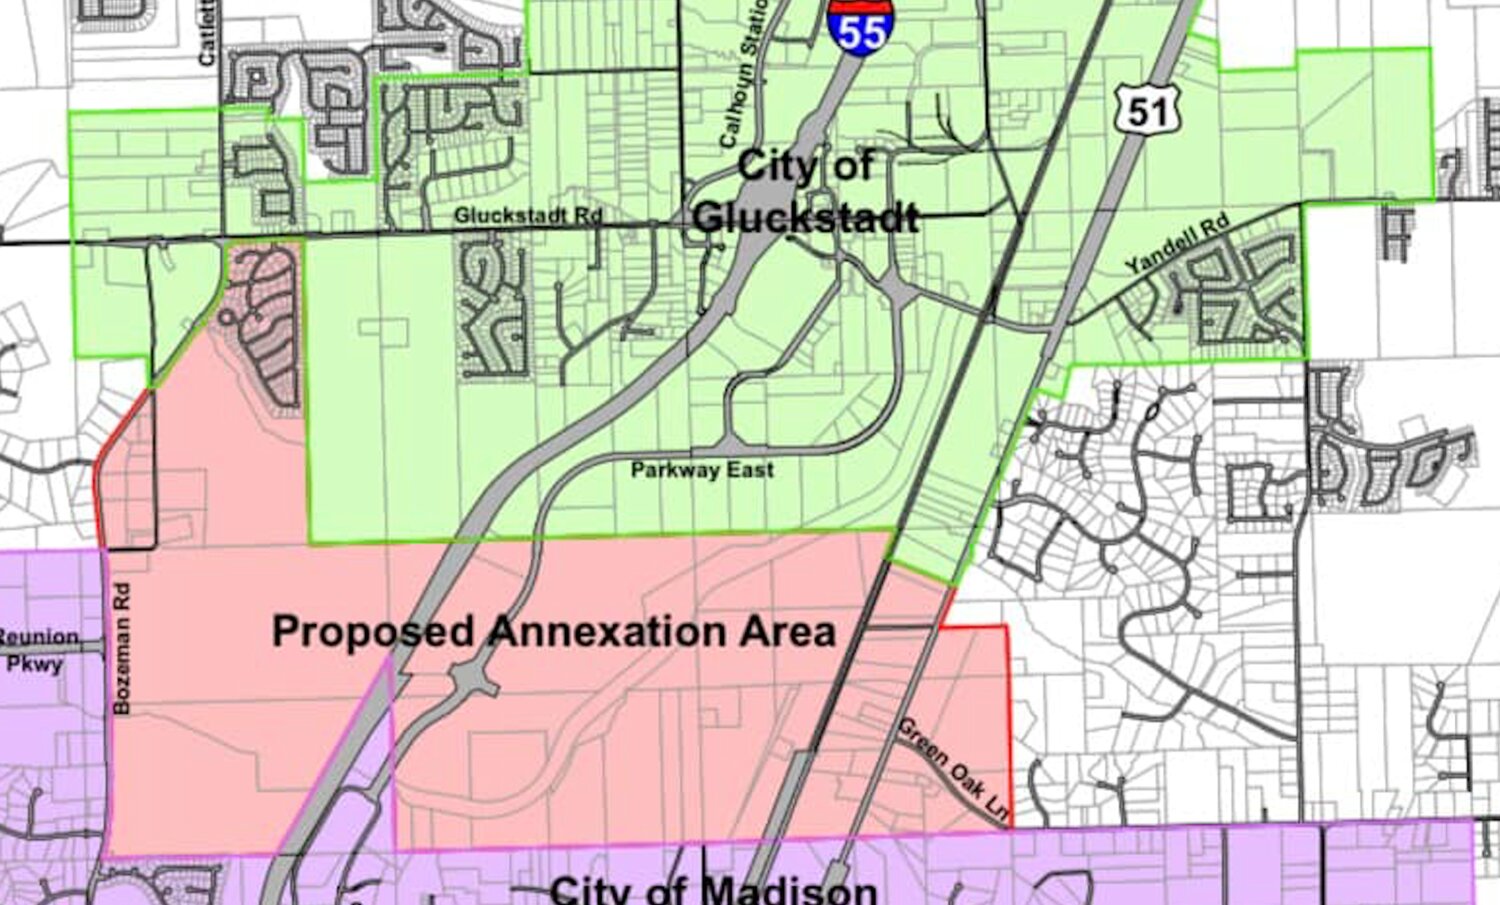 A map shows the planned annexation area by the City of Gluckstadt.